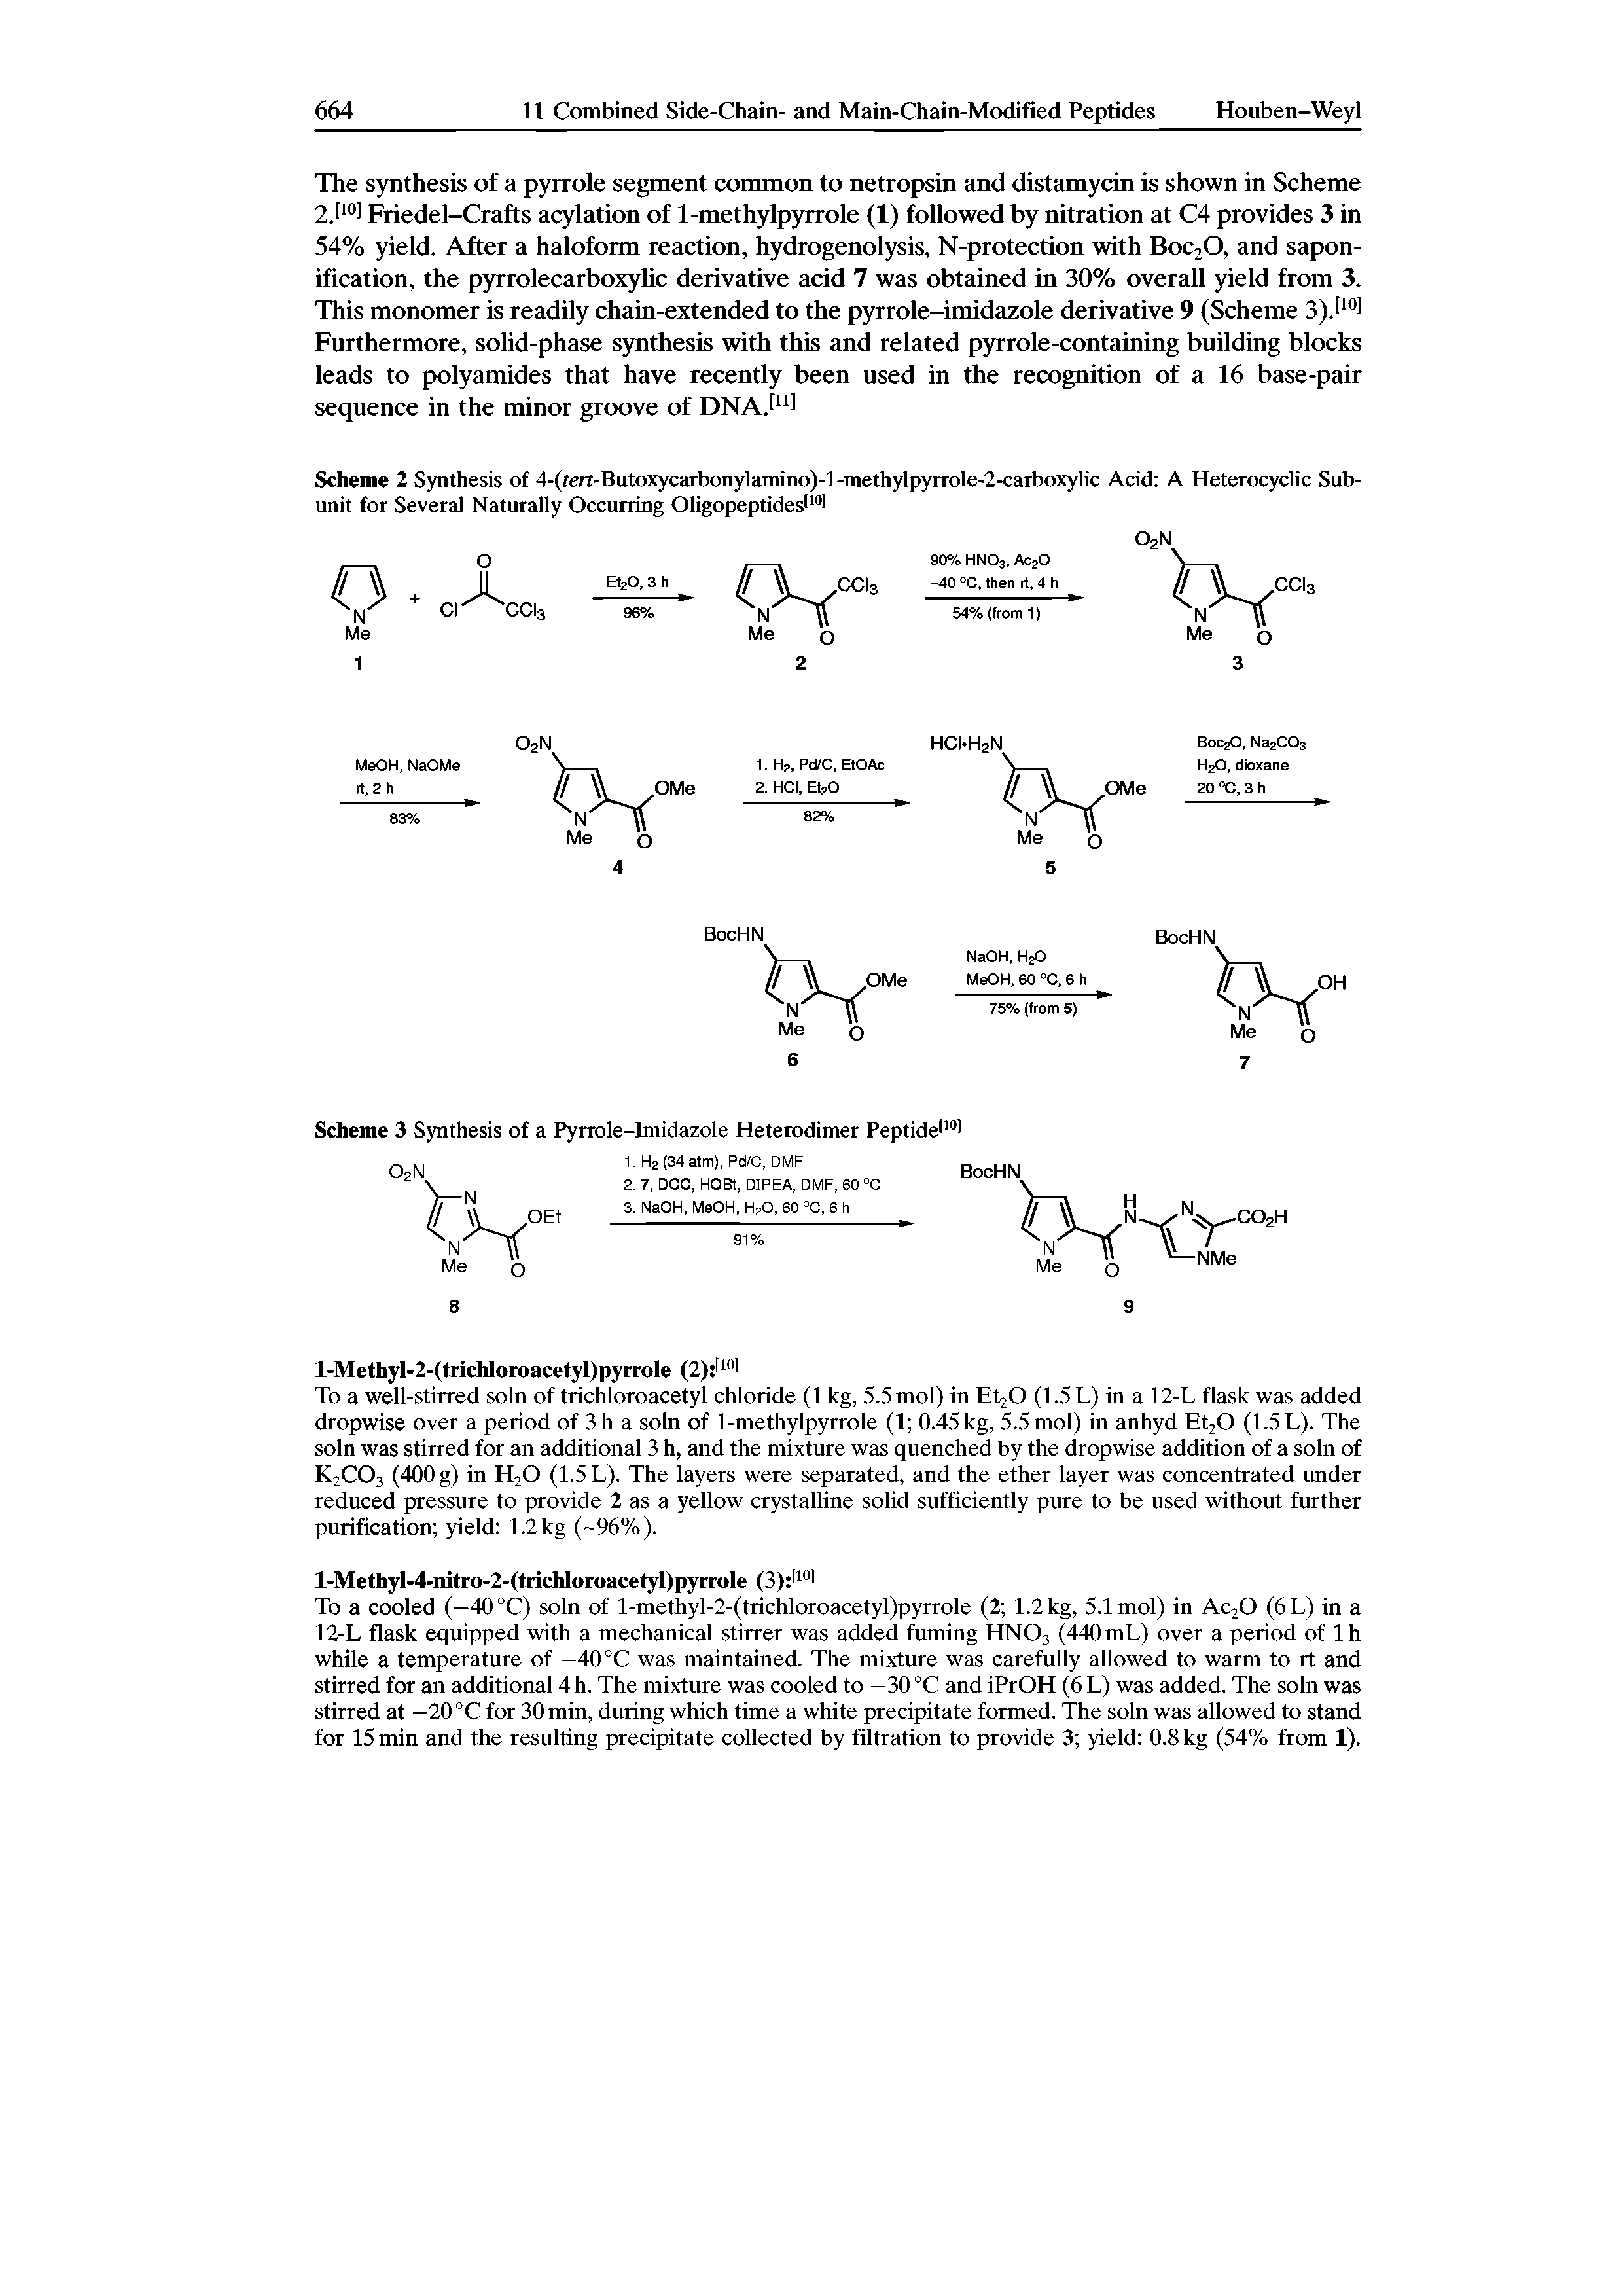 Scheme 2 Synthesis of 4-(fert-Butoxycarbonylamino)-l-methylpyrrole-2-carboxylic Acid A Heterocyclic Subunit for Several Naturally Occurring Oligopeptidesl101...